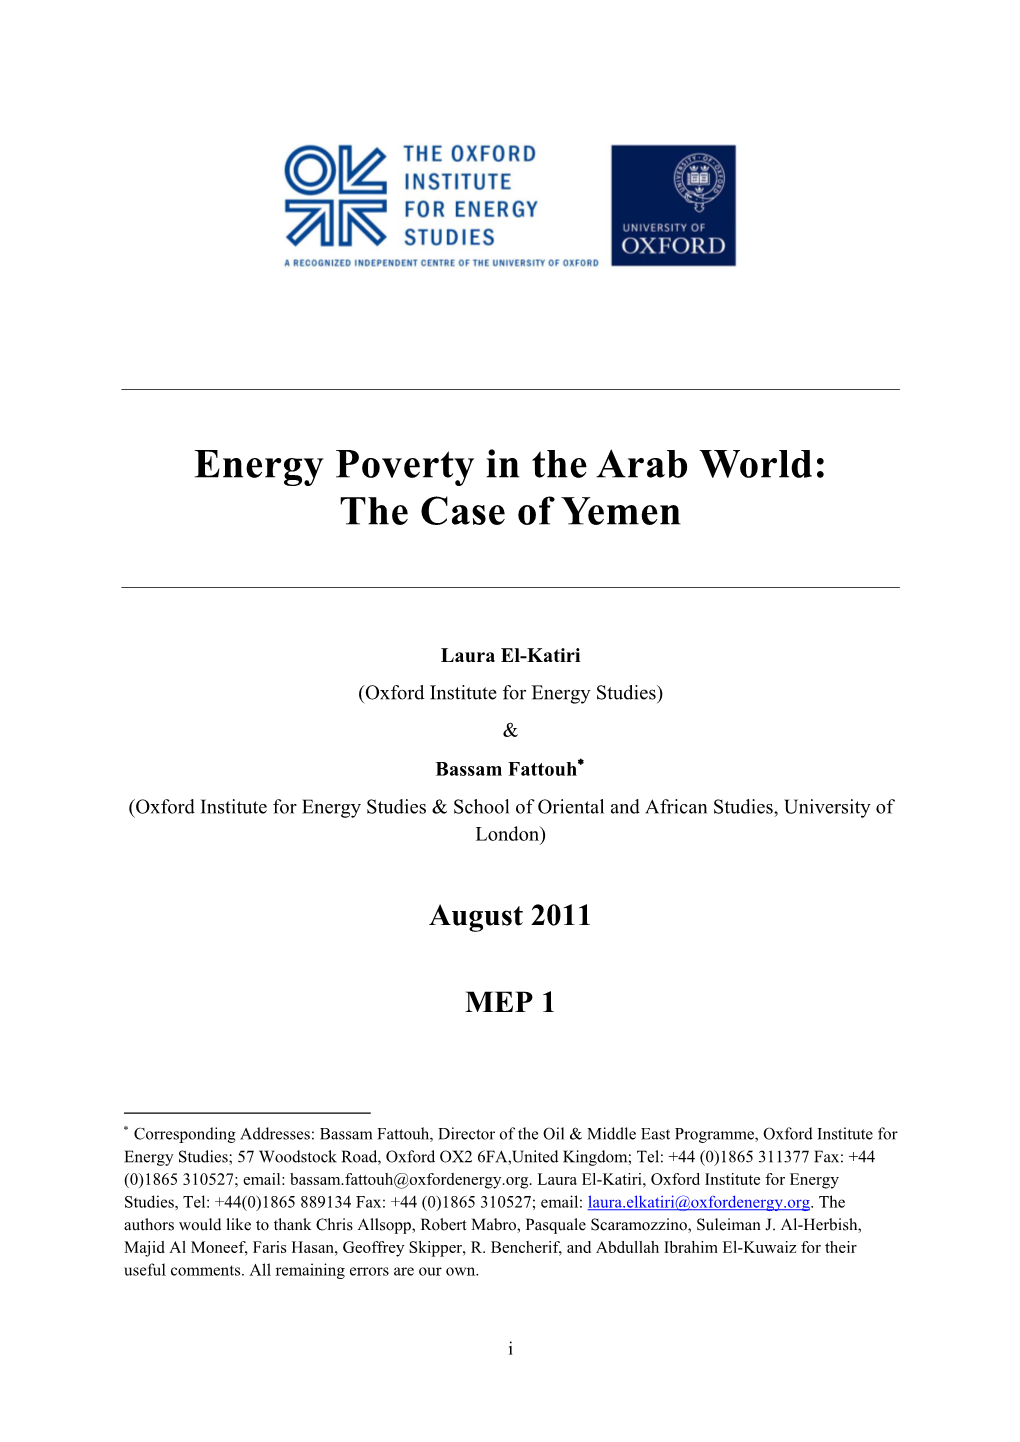 Energy Poverty in the Arab World: the Case of Yemen